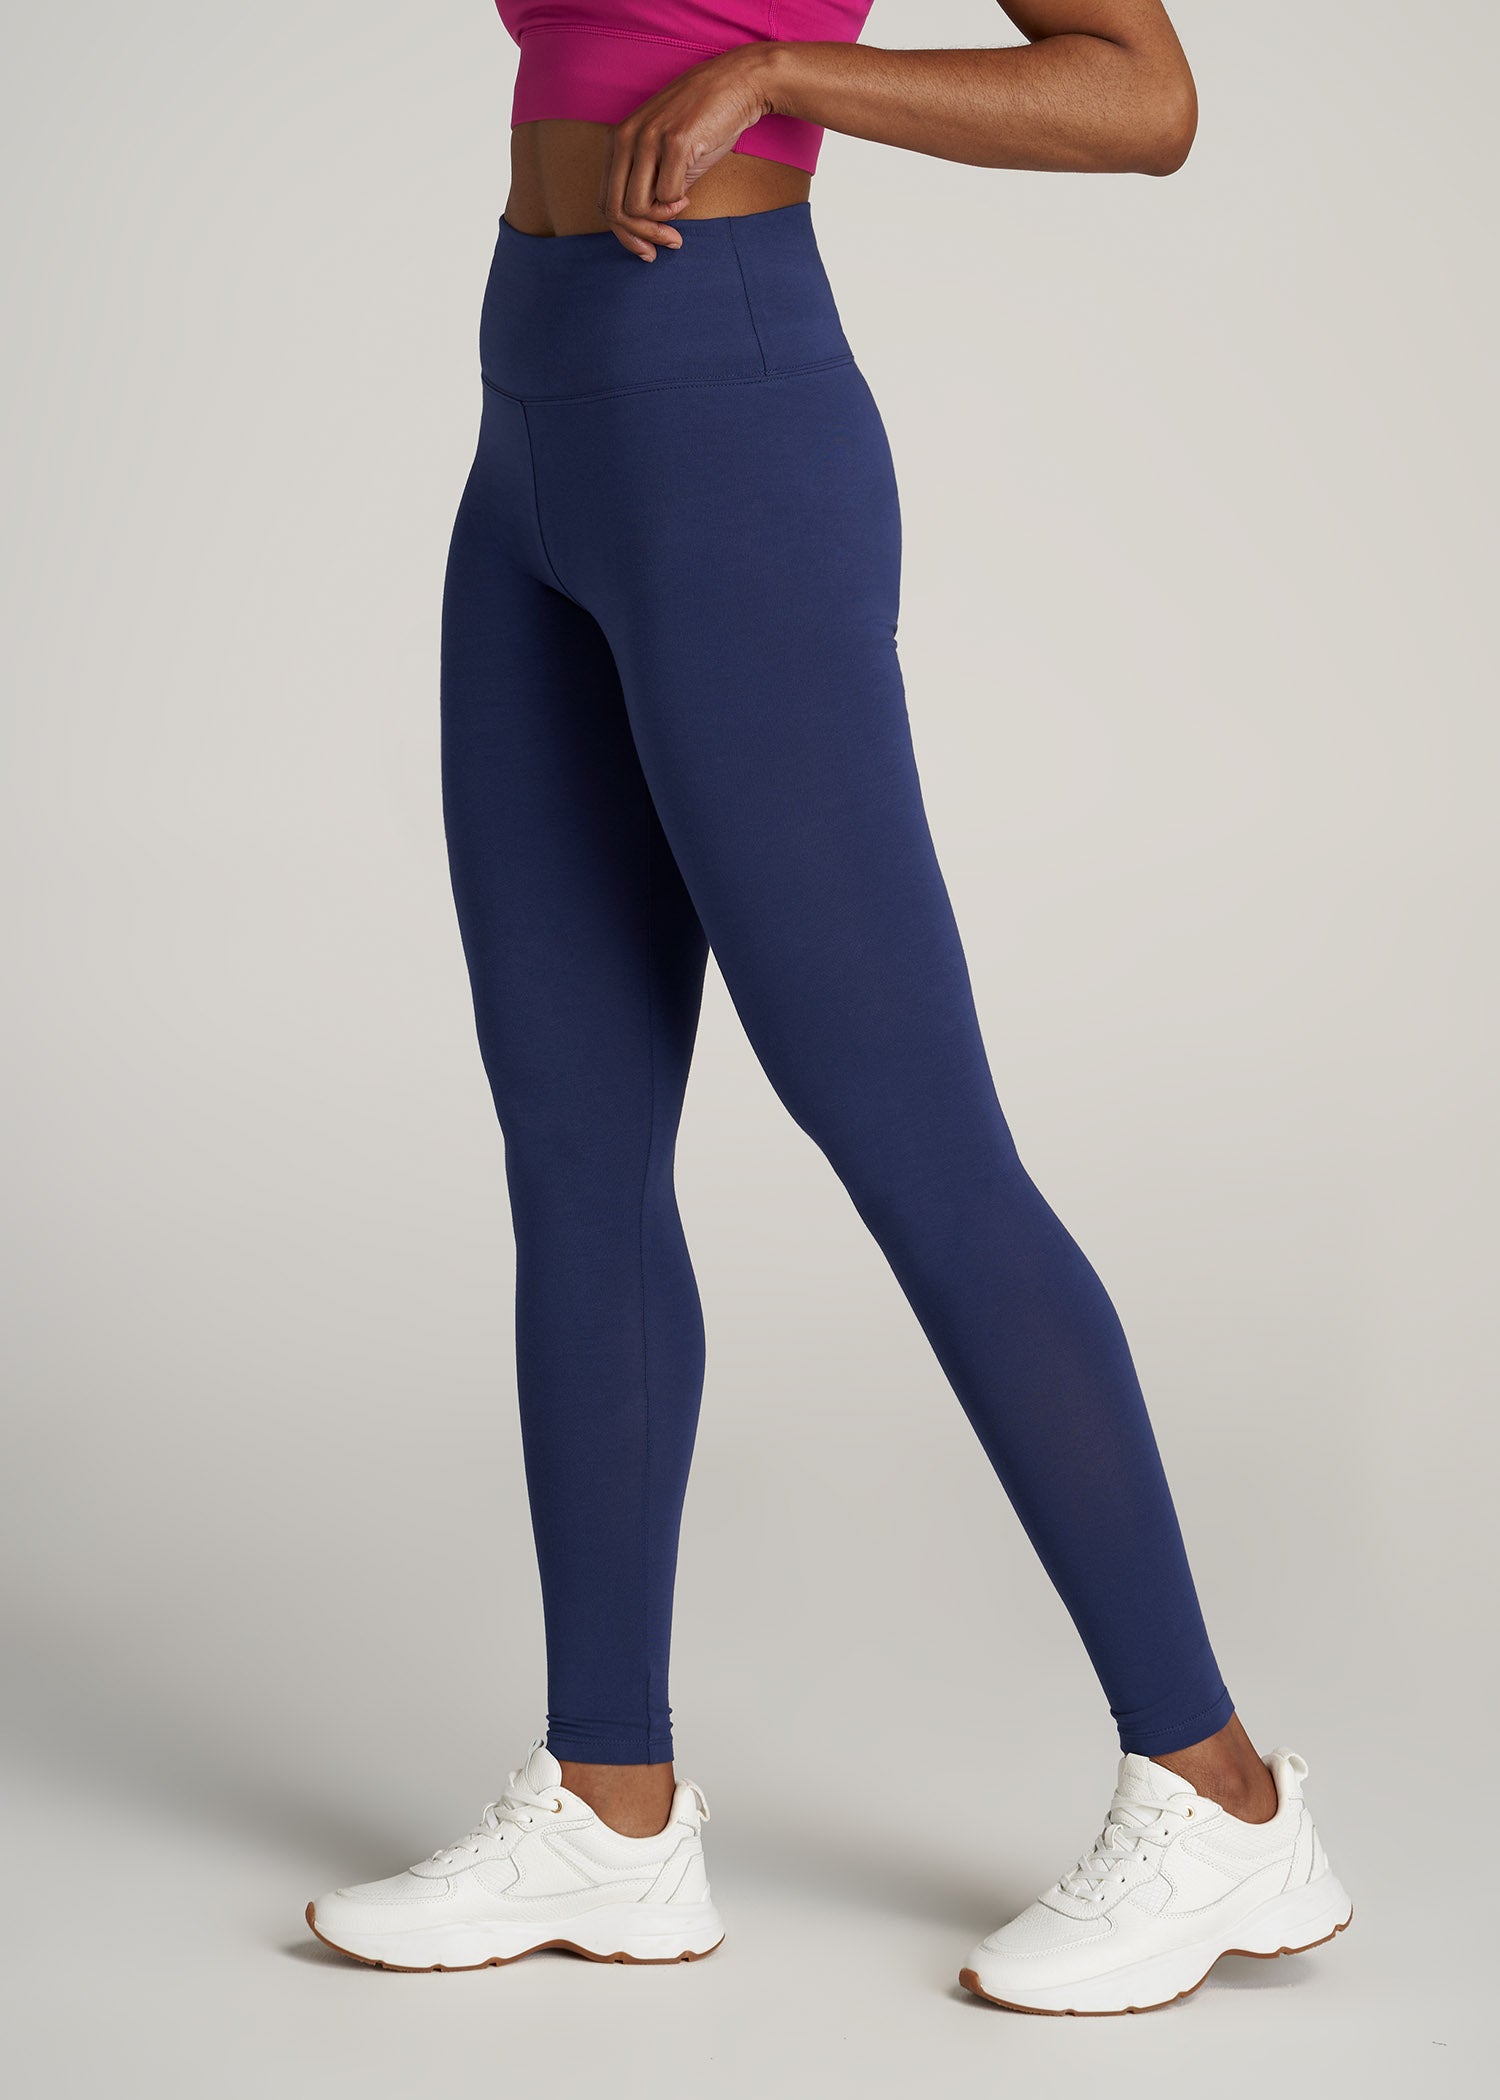 Soft Surroundings Colorful Metro Leggings Button Midnight Teal Blue Size  Medium - $43 - From Kat